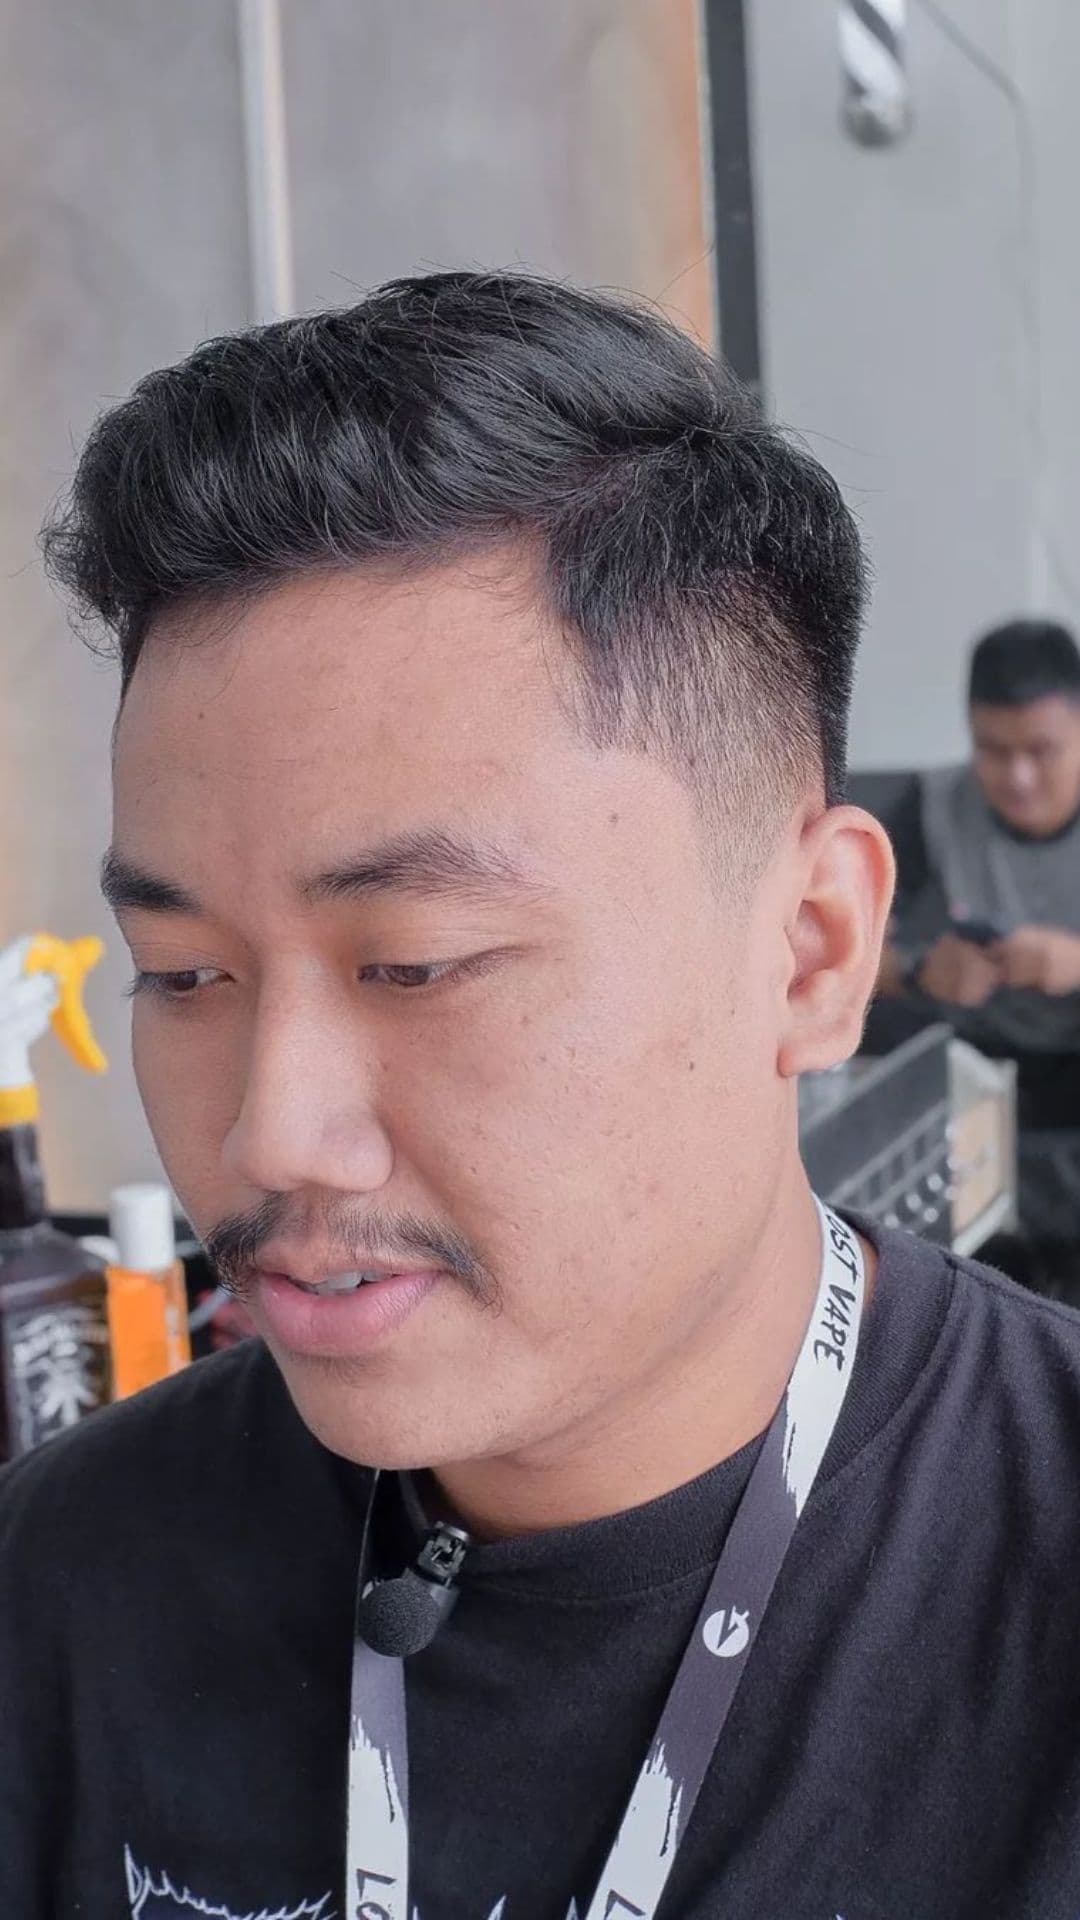 A man with a short pomp and low fade haircut.